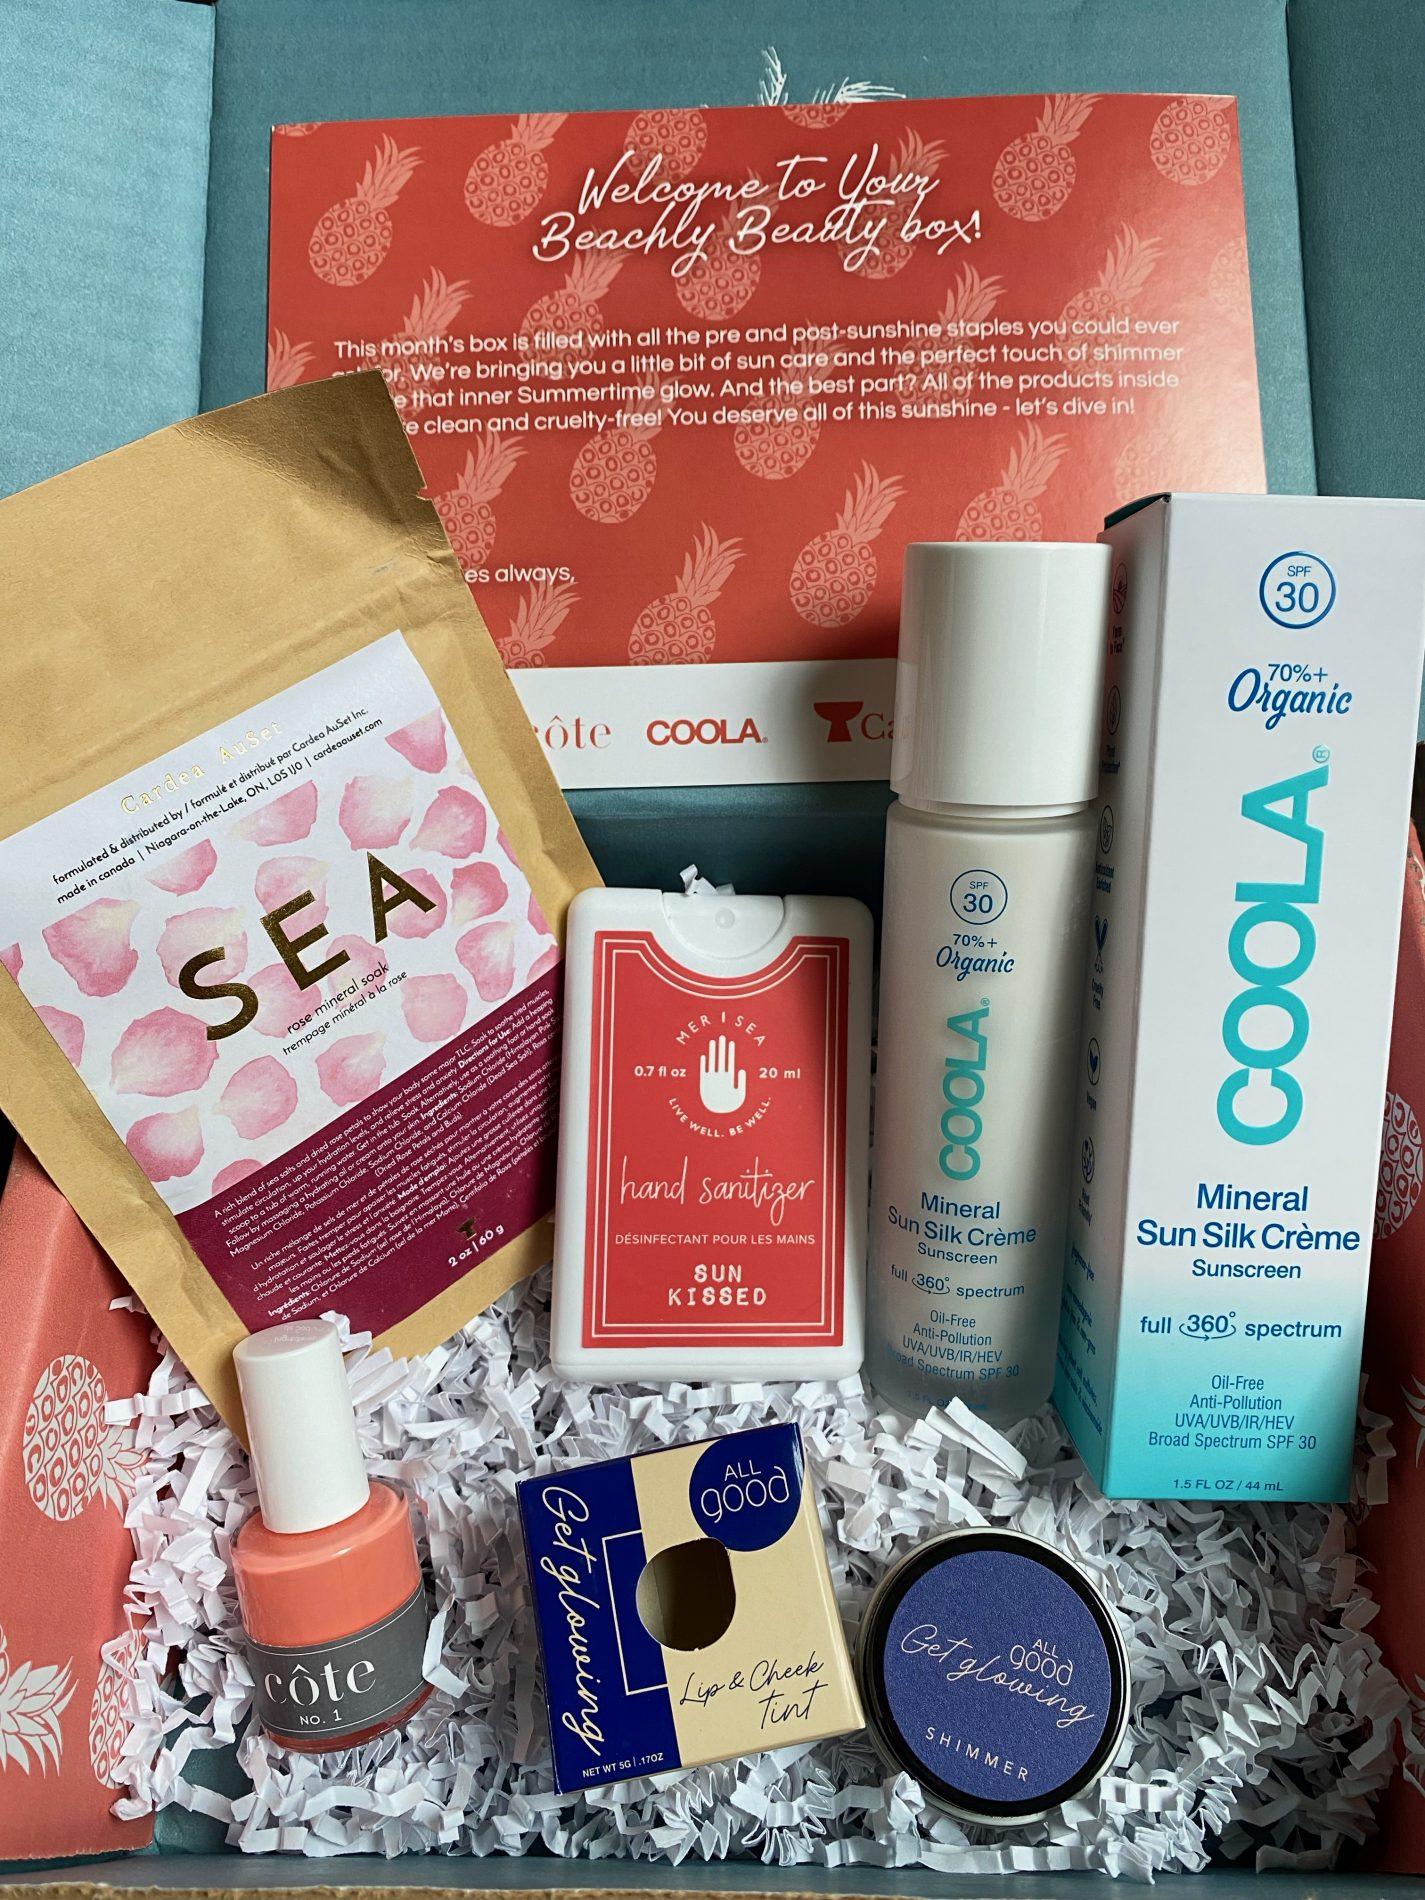 Beachly Beauty Box – July 2021 Review